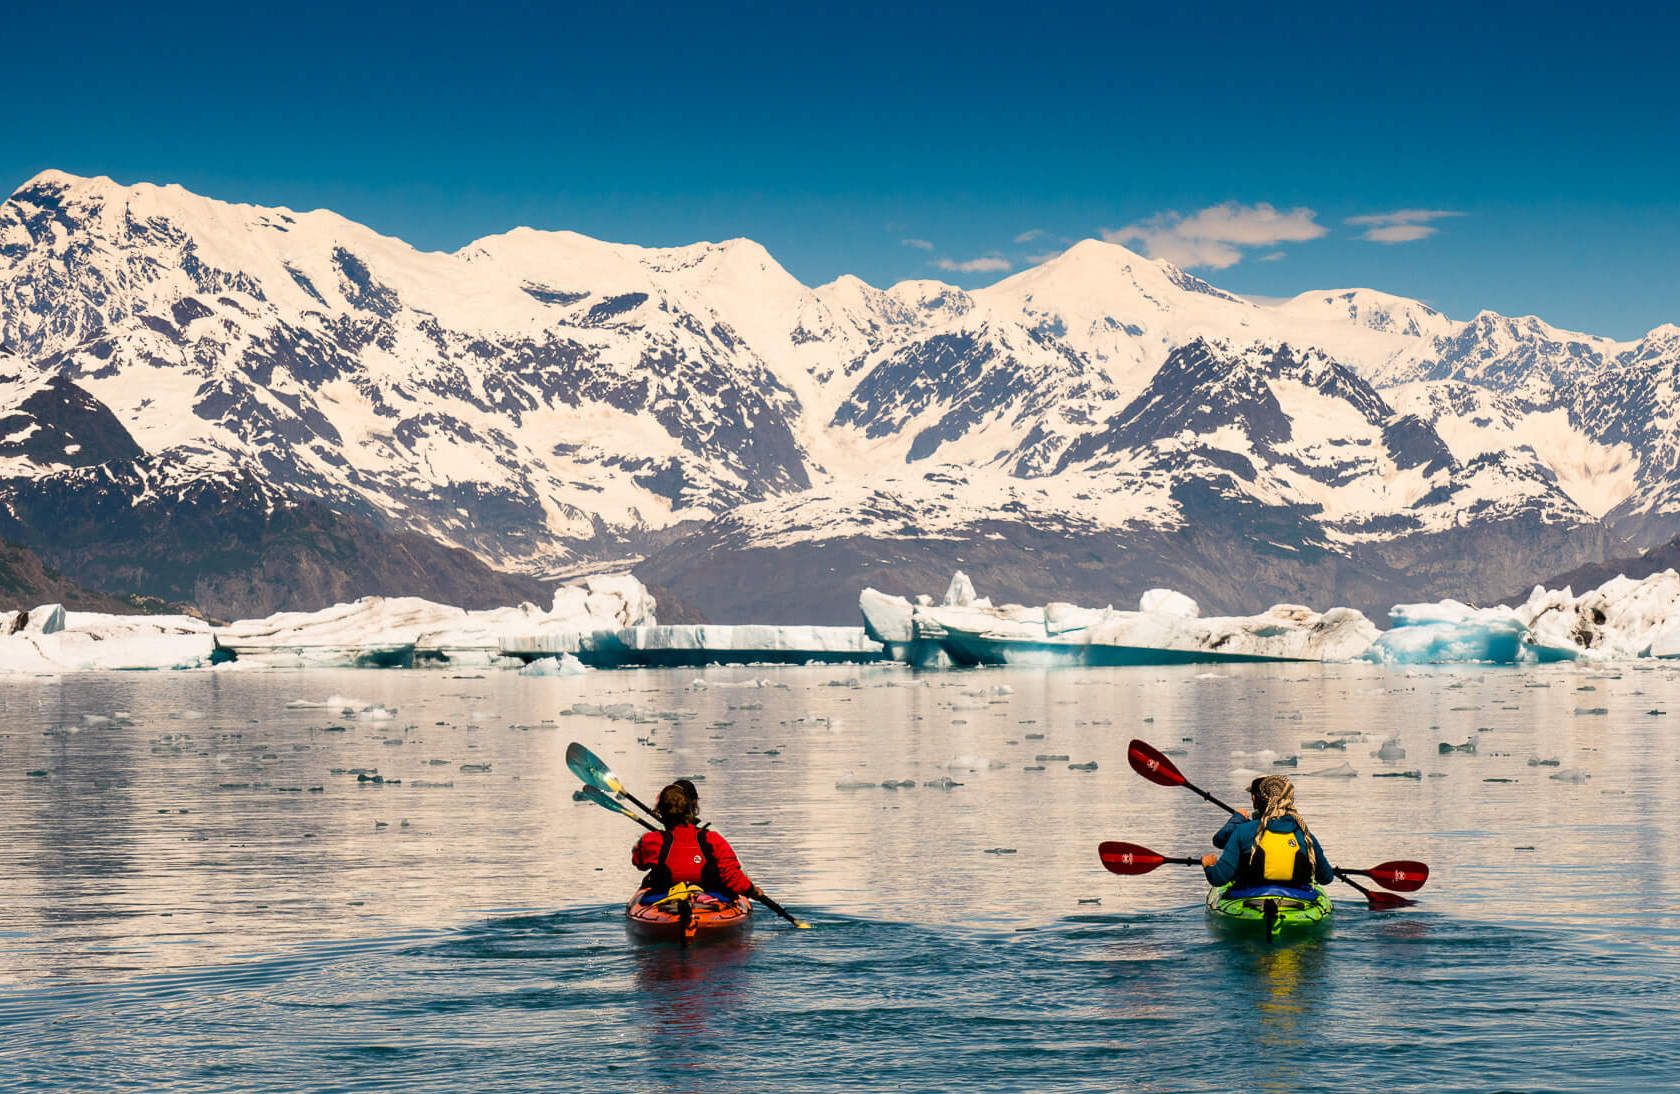 The best sea kayaks: for touring and exploring coastlines, islands and  inlets - Yachting World